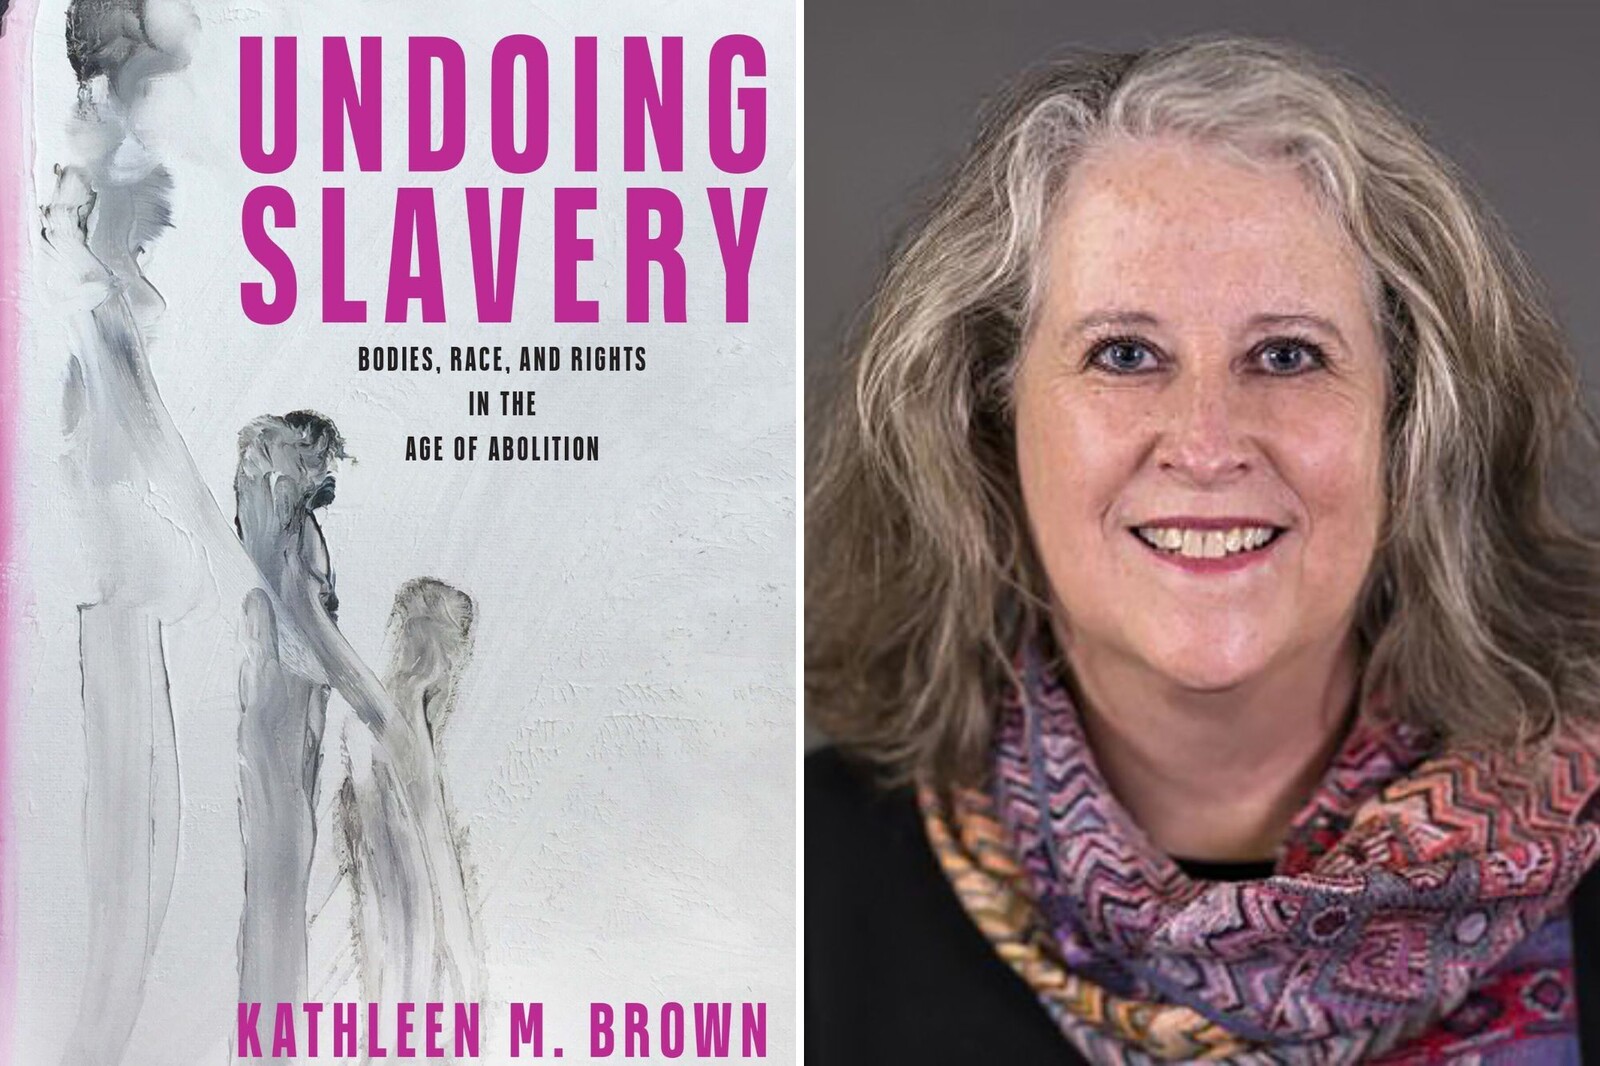 historian kathleen brown and her book cover